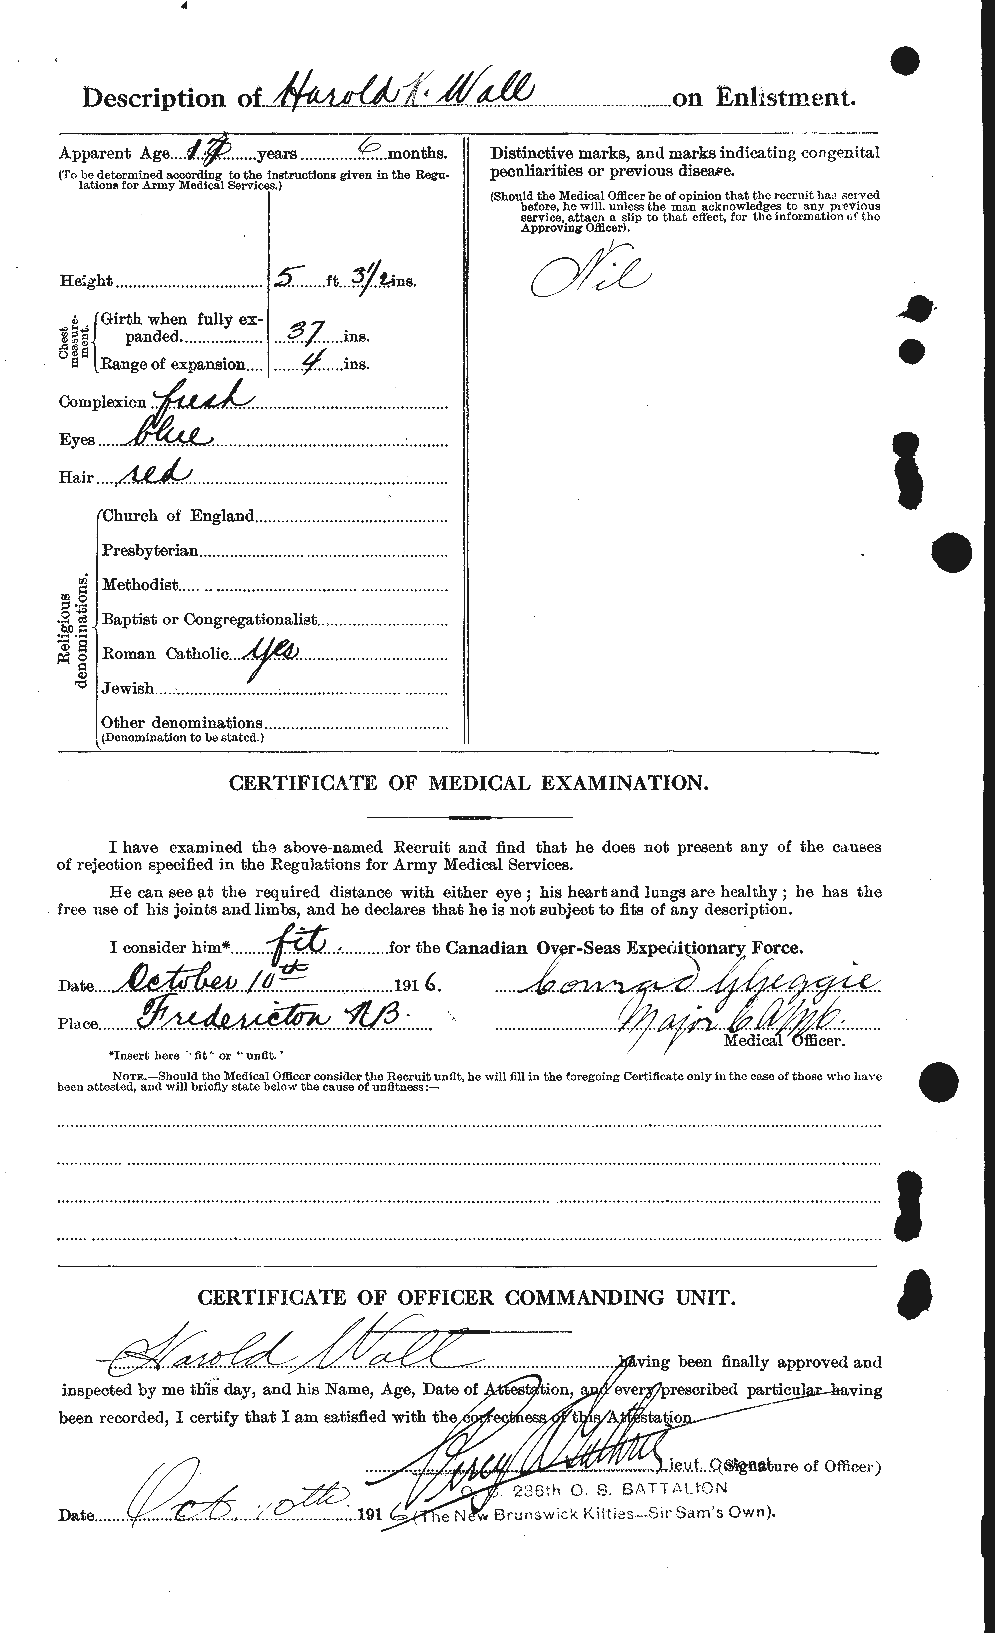 Personnel Records of the First World War - CEF 650230b